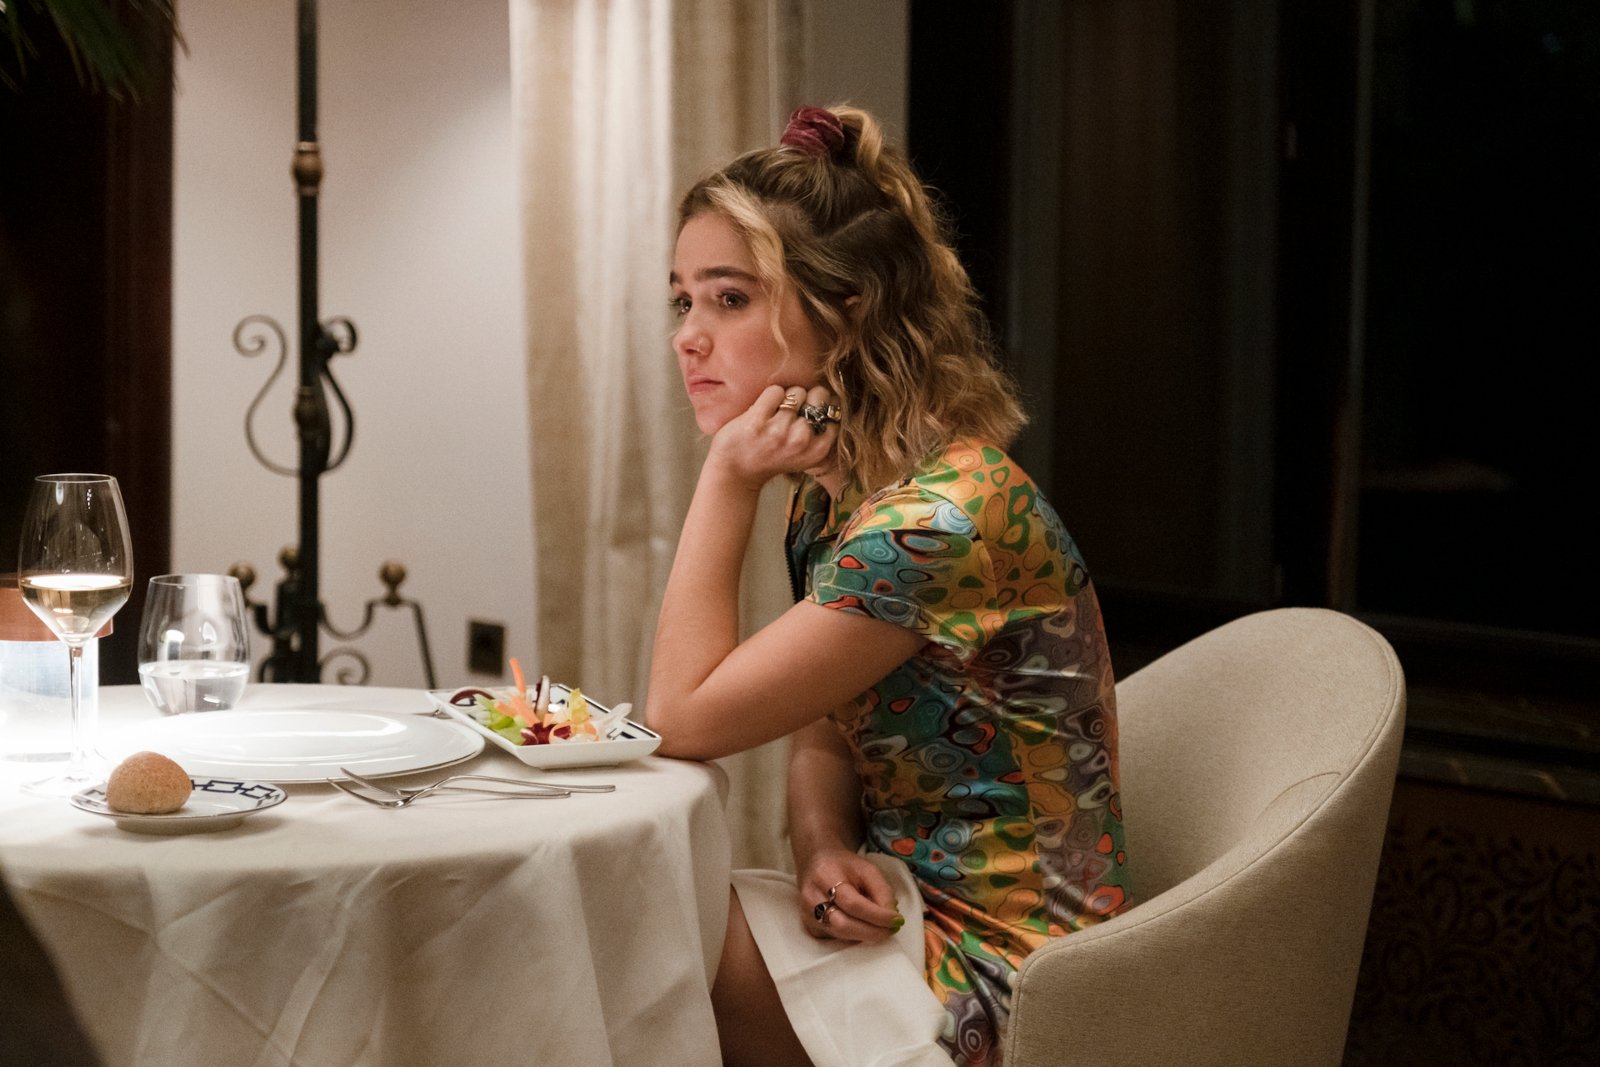 Haley Lu Richardson as Portia in 'The White Lotus' Season 2 for our article about which characters are most likely to die. She's sitting at a table and resting her head on her hand.